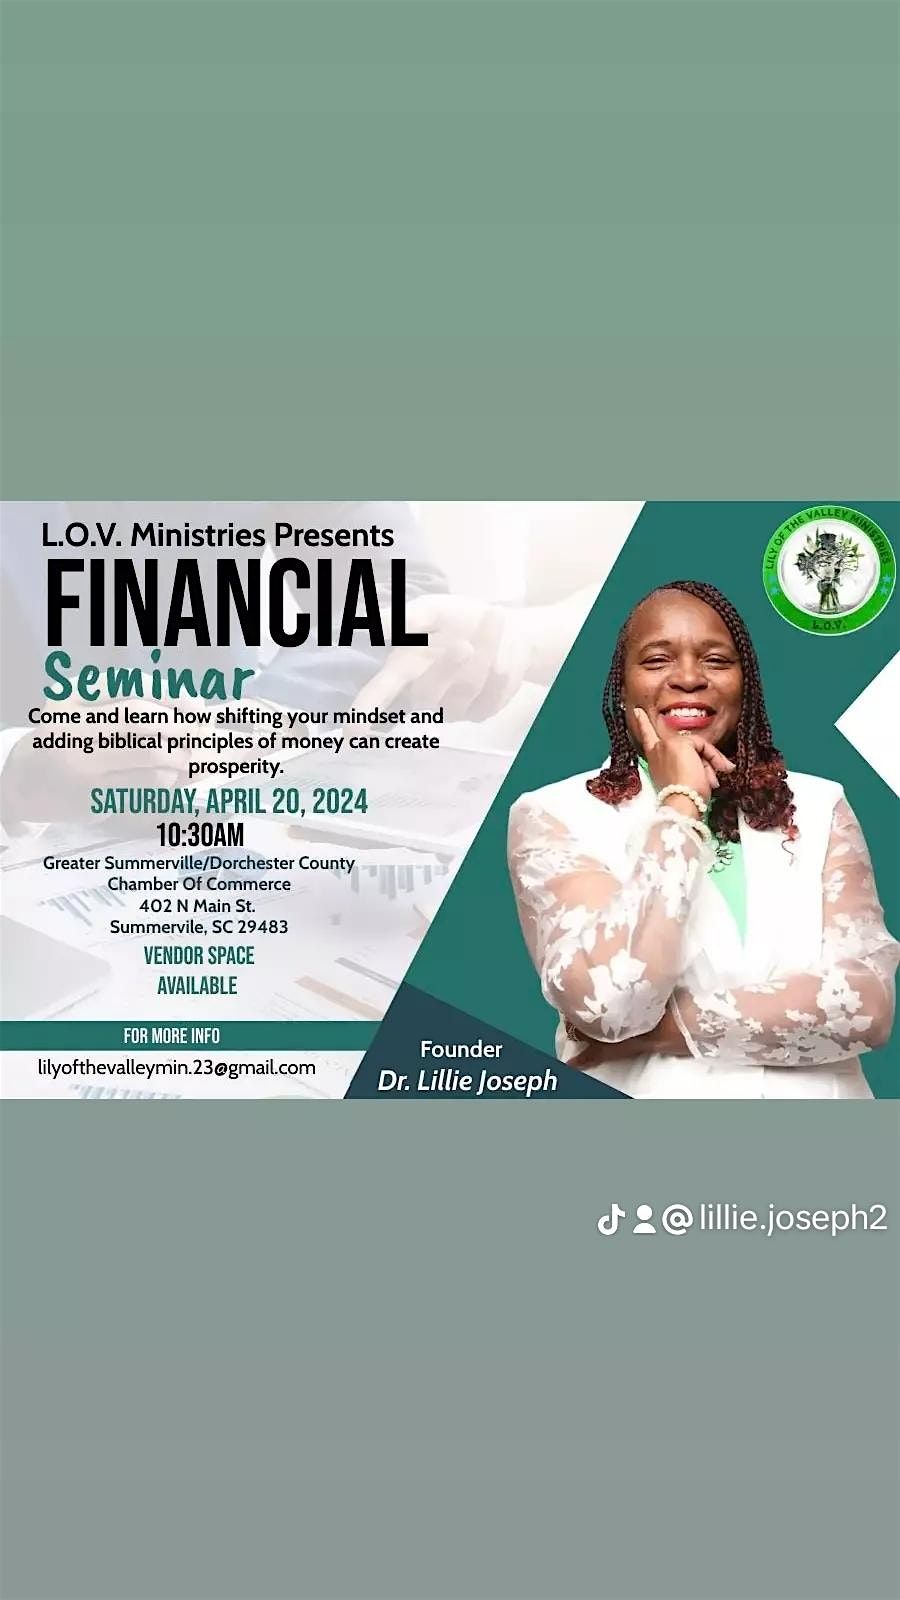 Lily of the Valley Ministries Financial Seminar